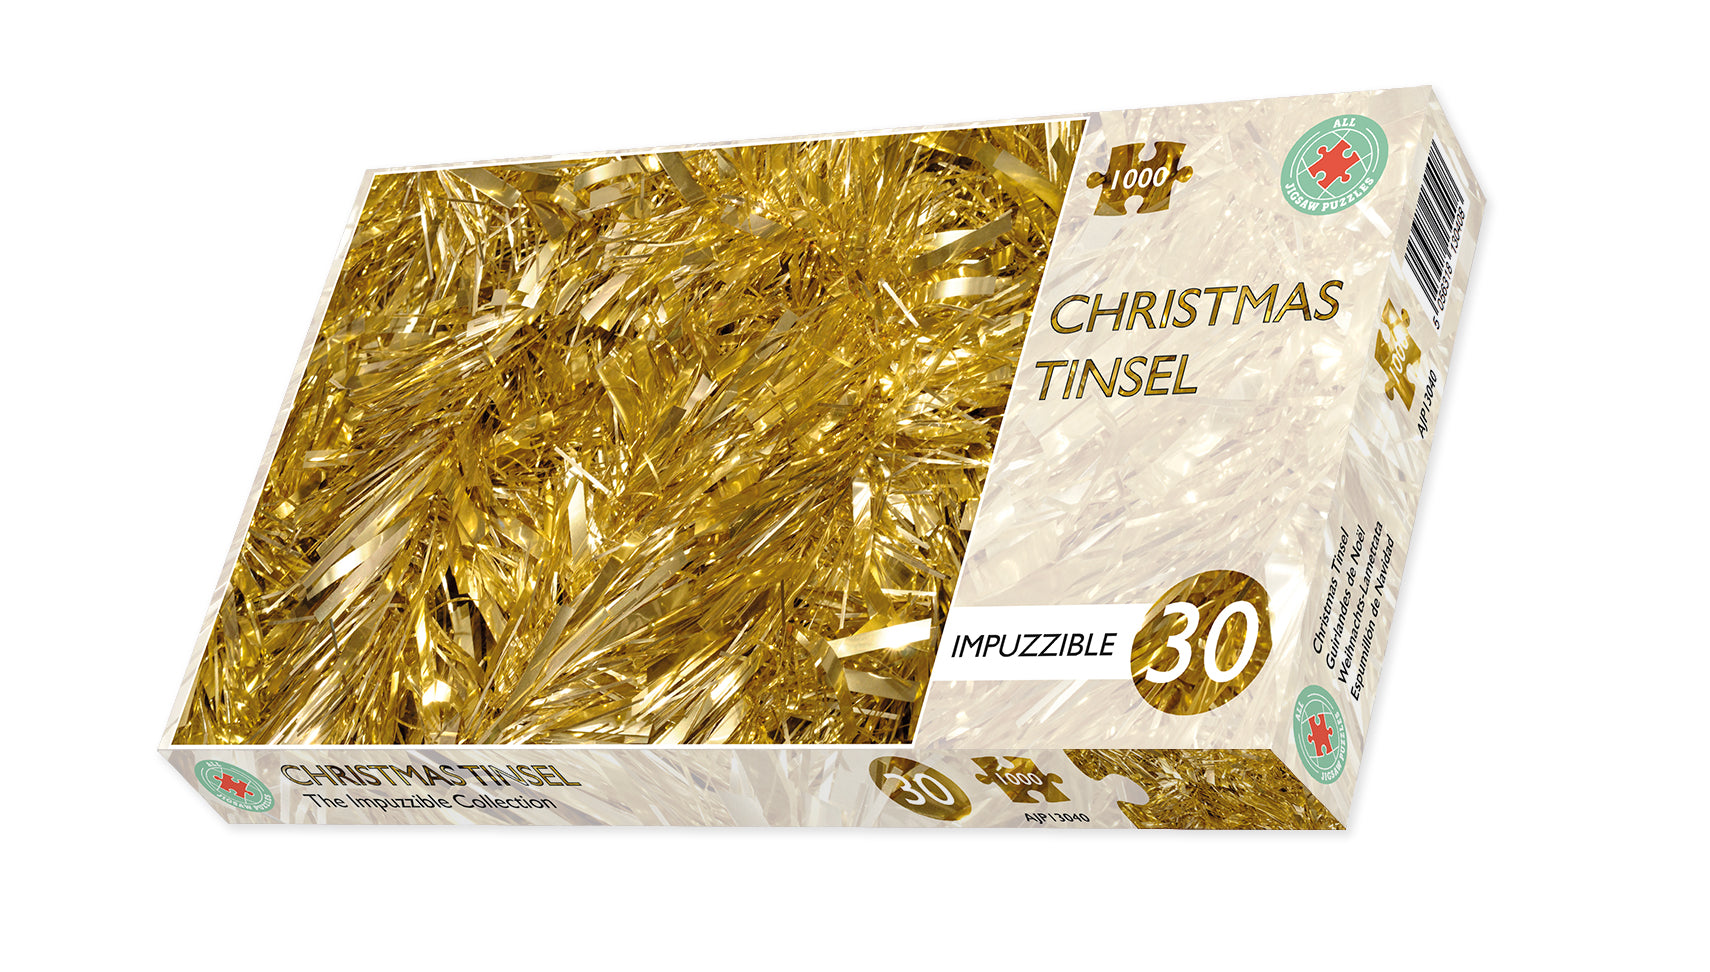 Christmas Tinsel - Impuzzible No 30 - 1000 Piece Jigsaw Puzzle box